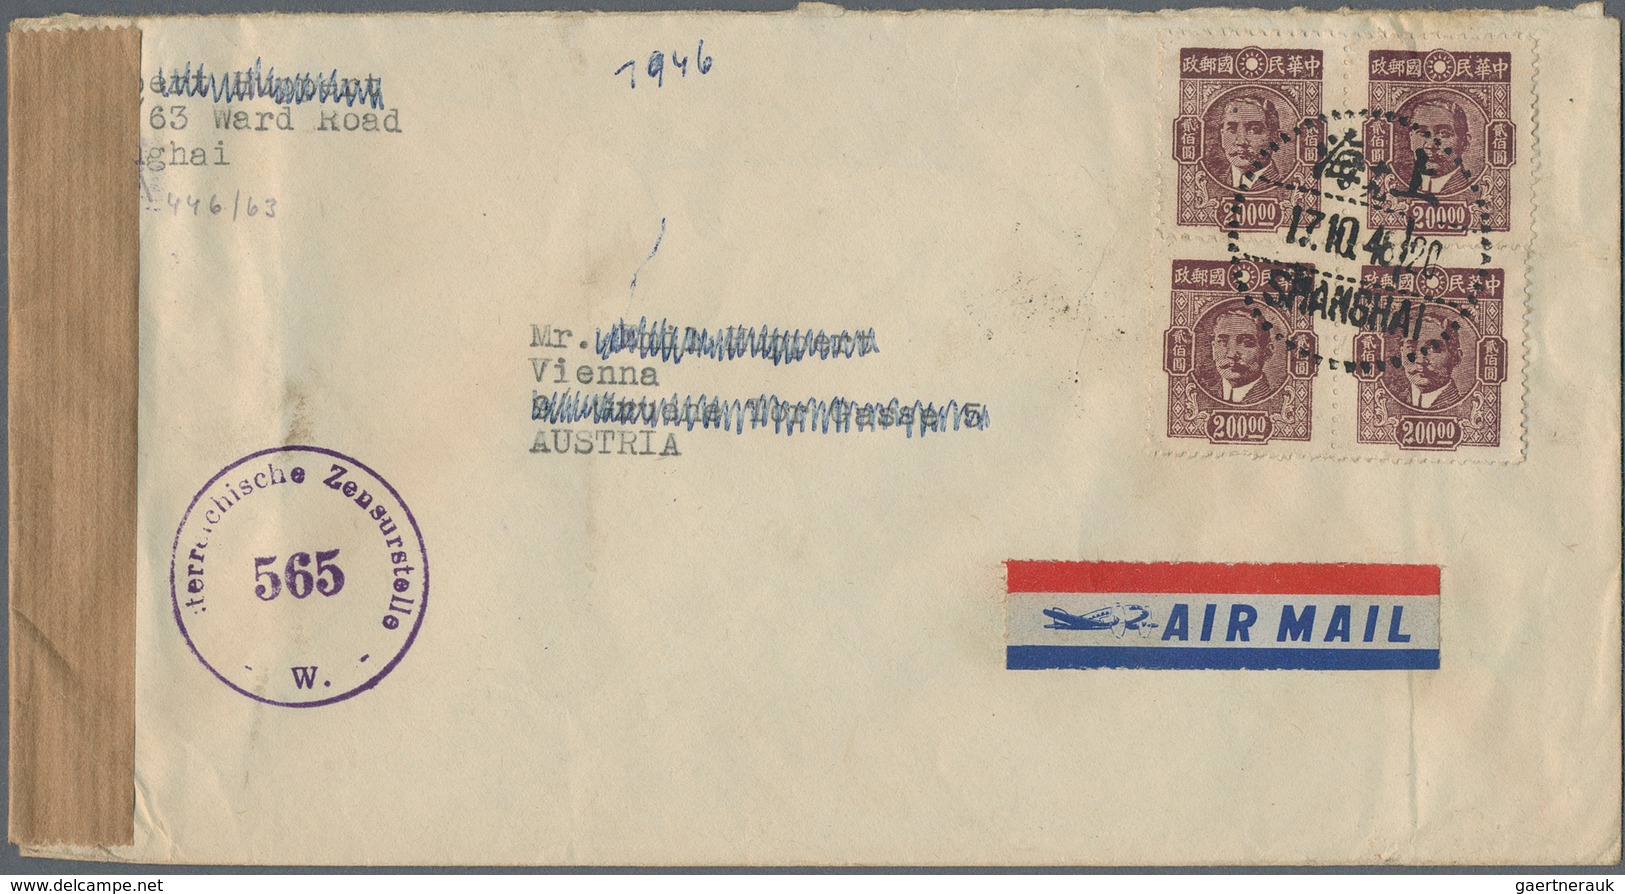 China: 1945/47, covers (9 inc. two surface) used to foreign, mostly Austria but also UK, Australia,